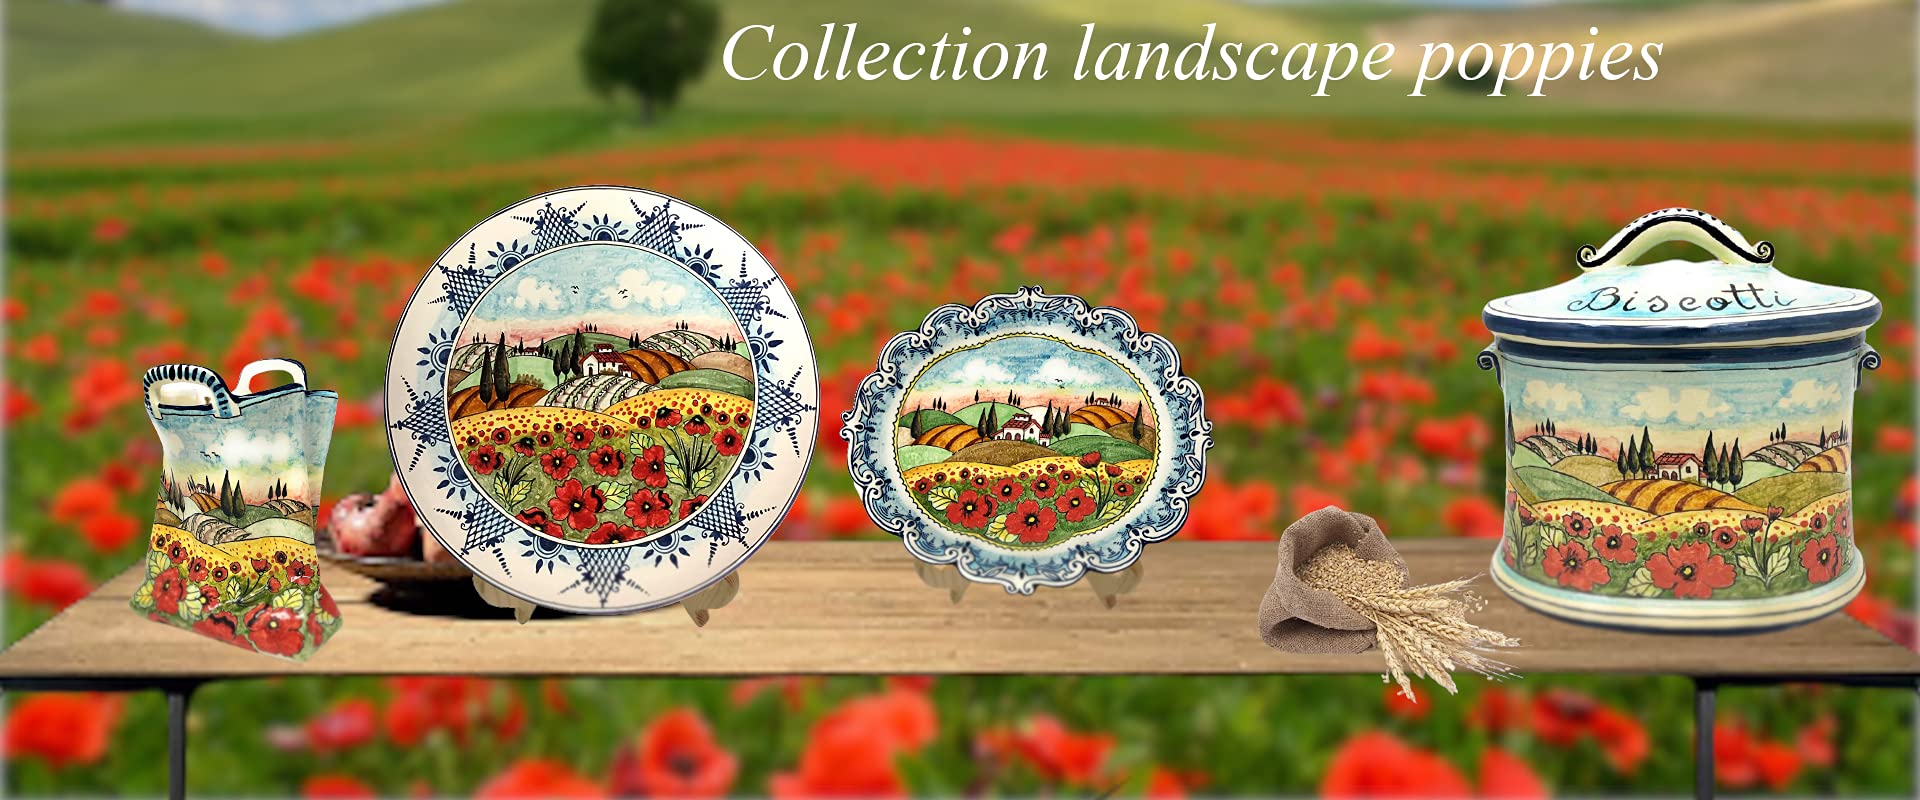 CERAMICHE D'ARTE PARRINI- Italian Ceramic Garlic Brings Jar Holder Hand Painted Made in ITALY Decorated Poppies Landscape Tuscan Art Pottery